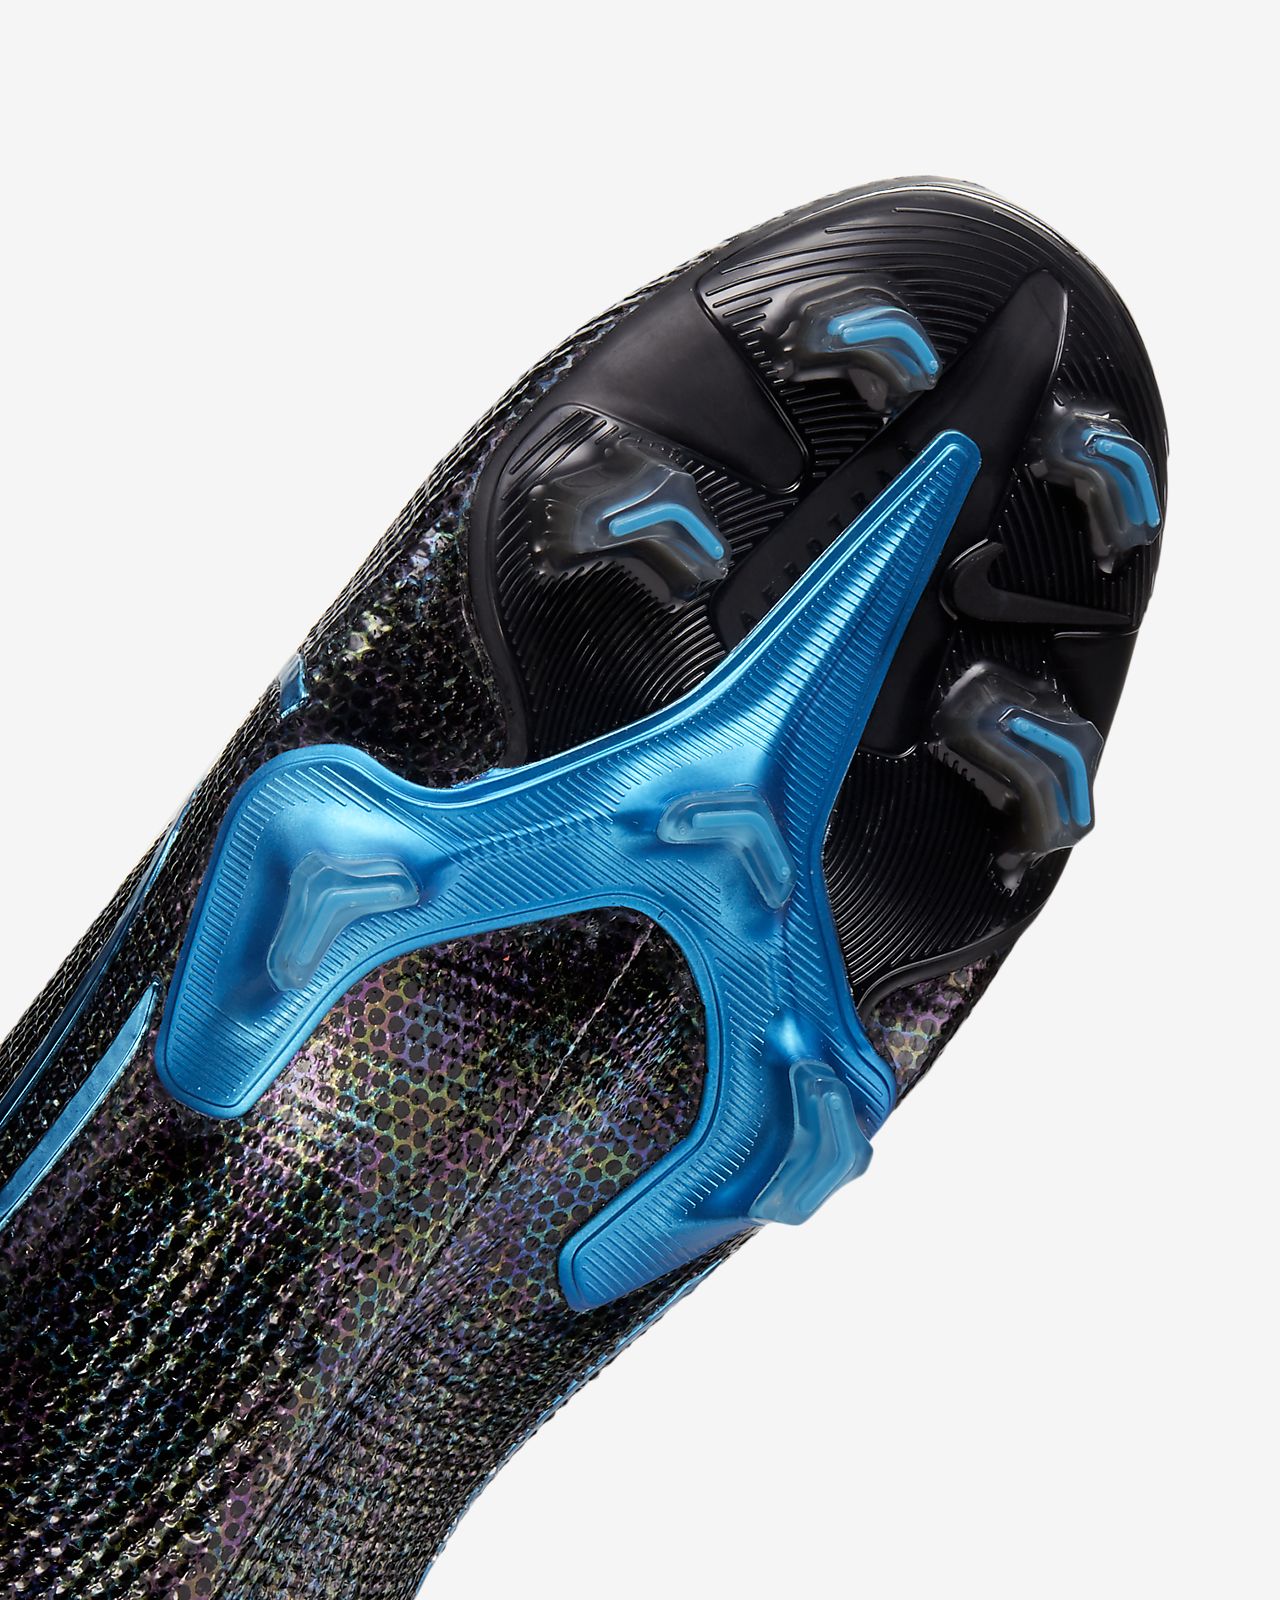 Buy Nike Mercurial Superfly 7 Pro FG Future Lab for Herre i.